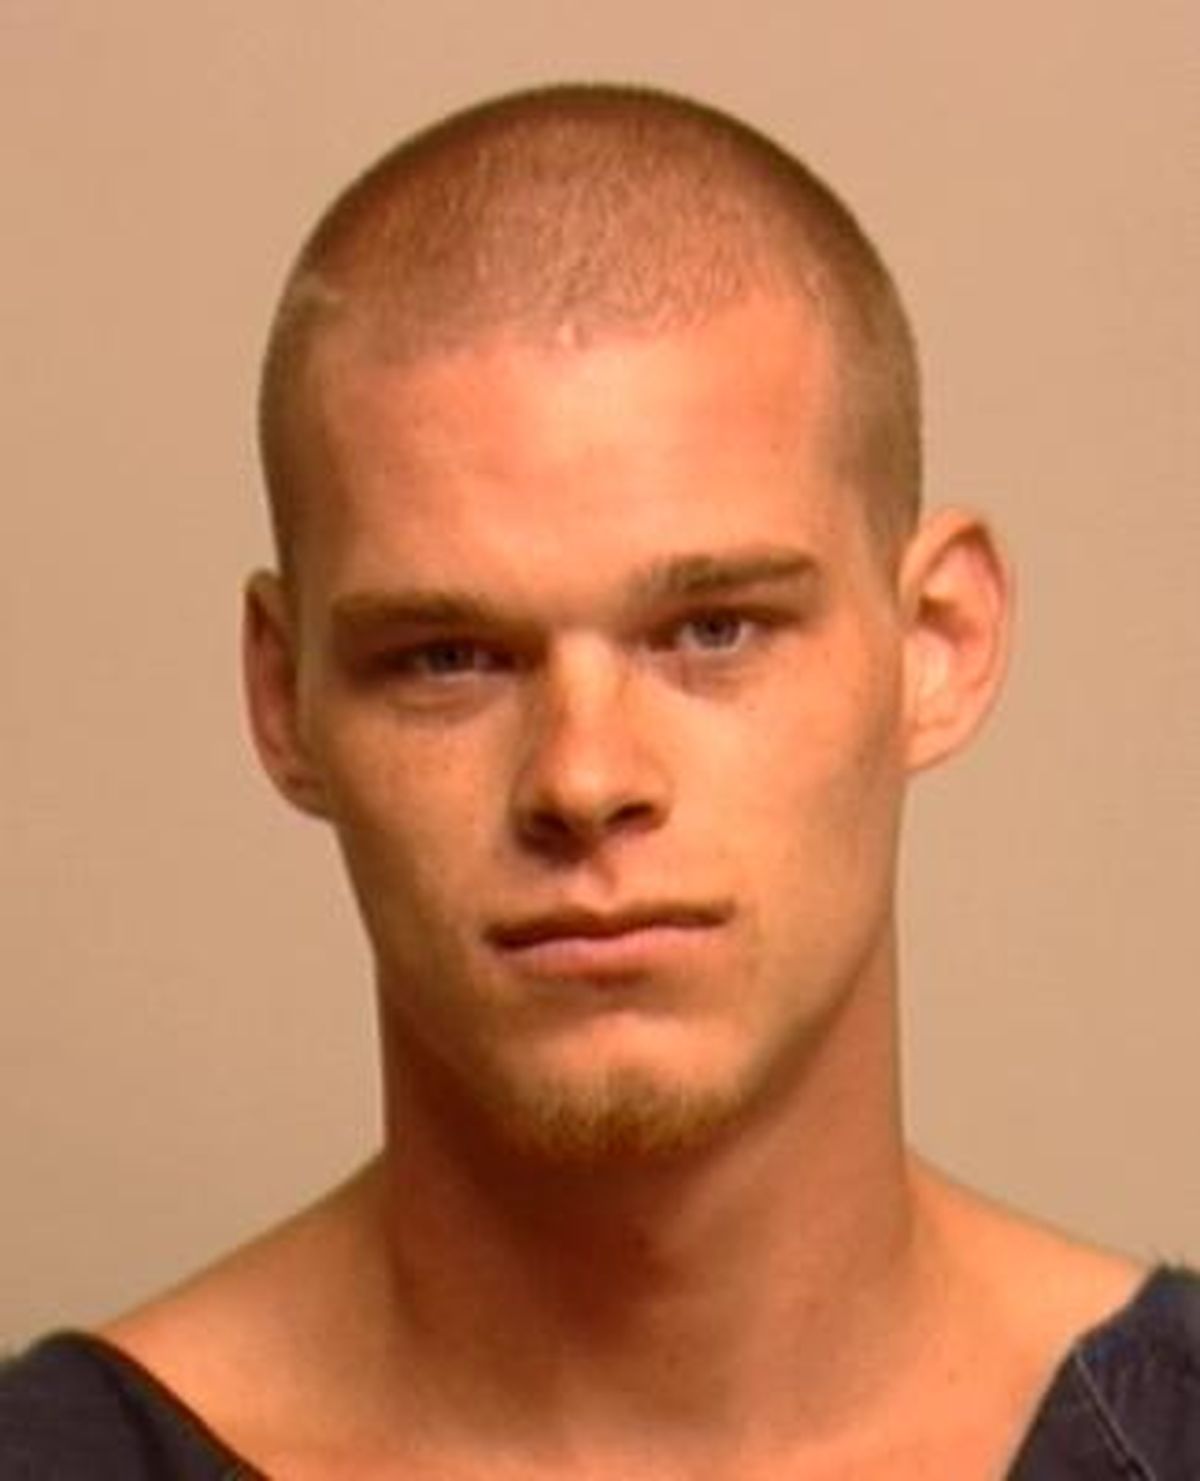 William E. Higgins, 21, faces a charge of first-degree robbery for allegedly helping Ariel A. Arrieta rob the Rite Aid at 5520 N. Division St. on Sept. 27 (Spokane Police Department)